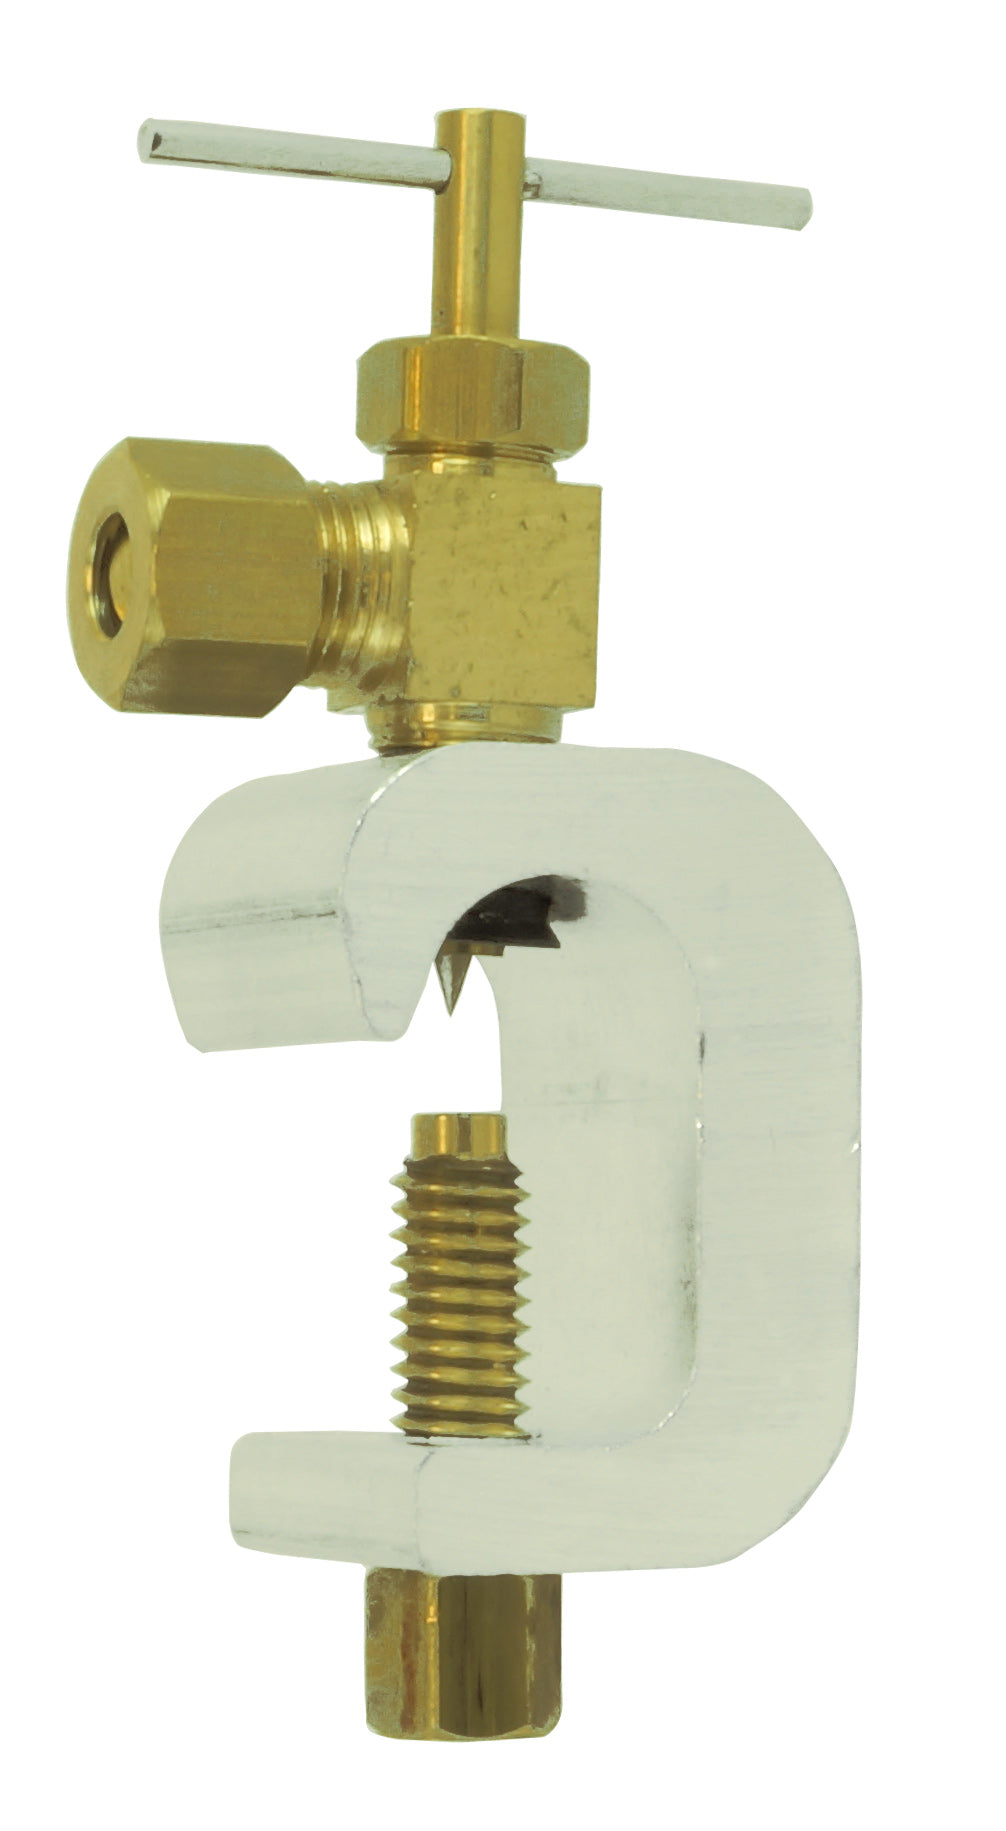 Self-Pierce Feed Water Adapter C-arm for 1/4" Tubing